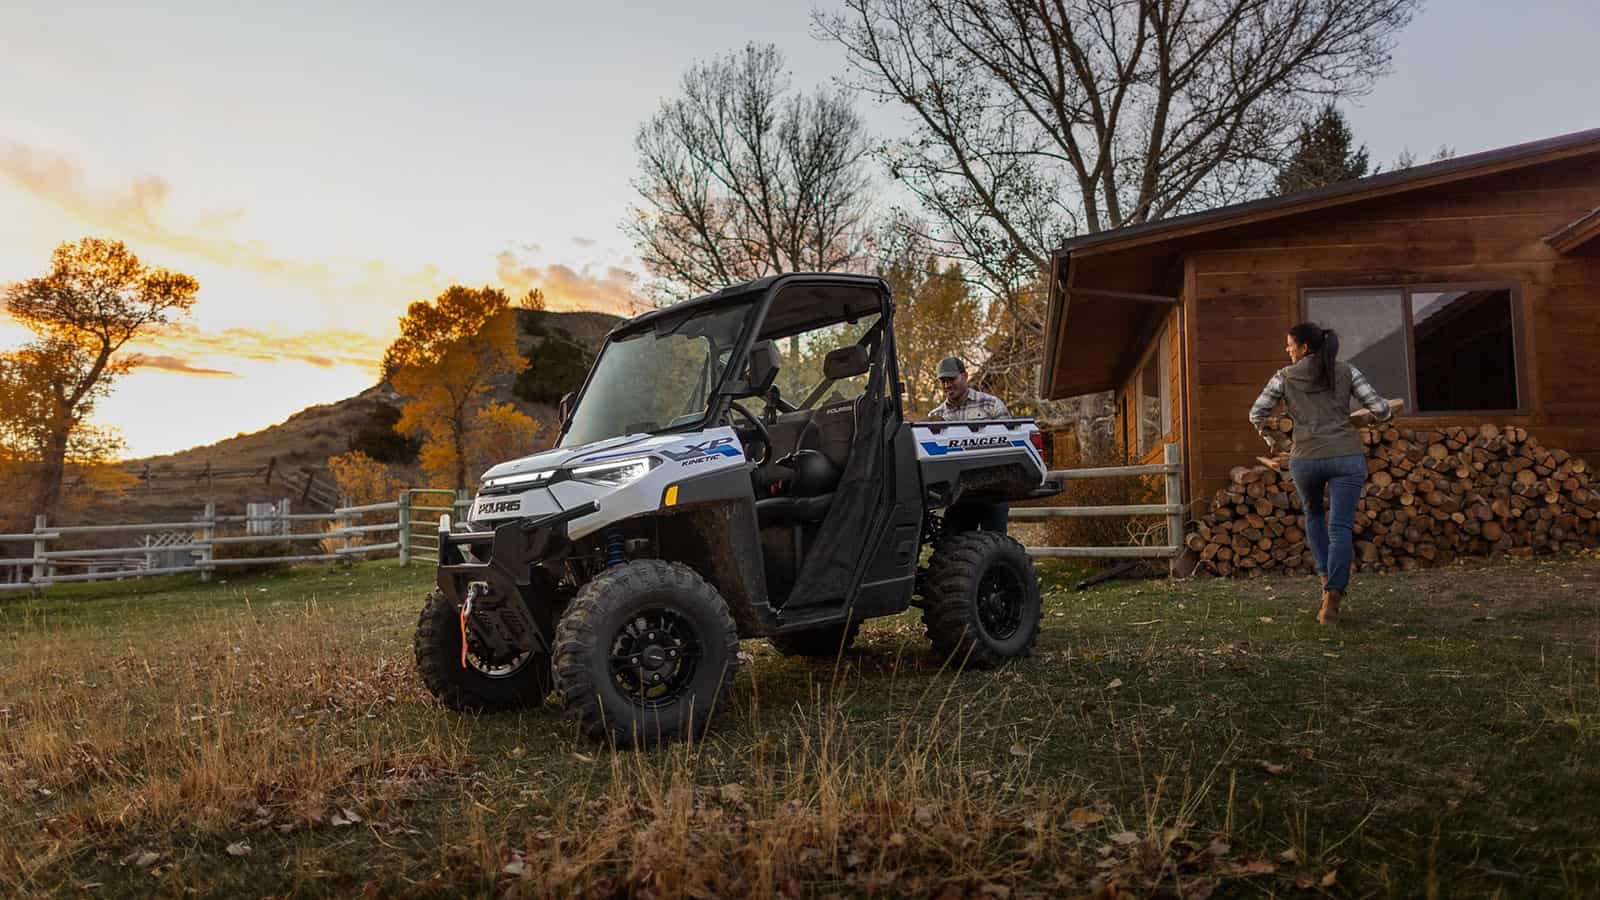 Image of a Polaris Ranger Kinetic at a cabin that could be part of a EV charging network